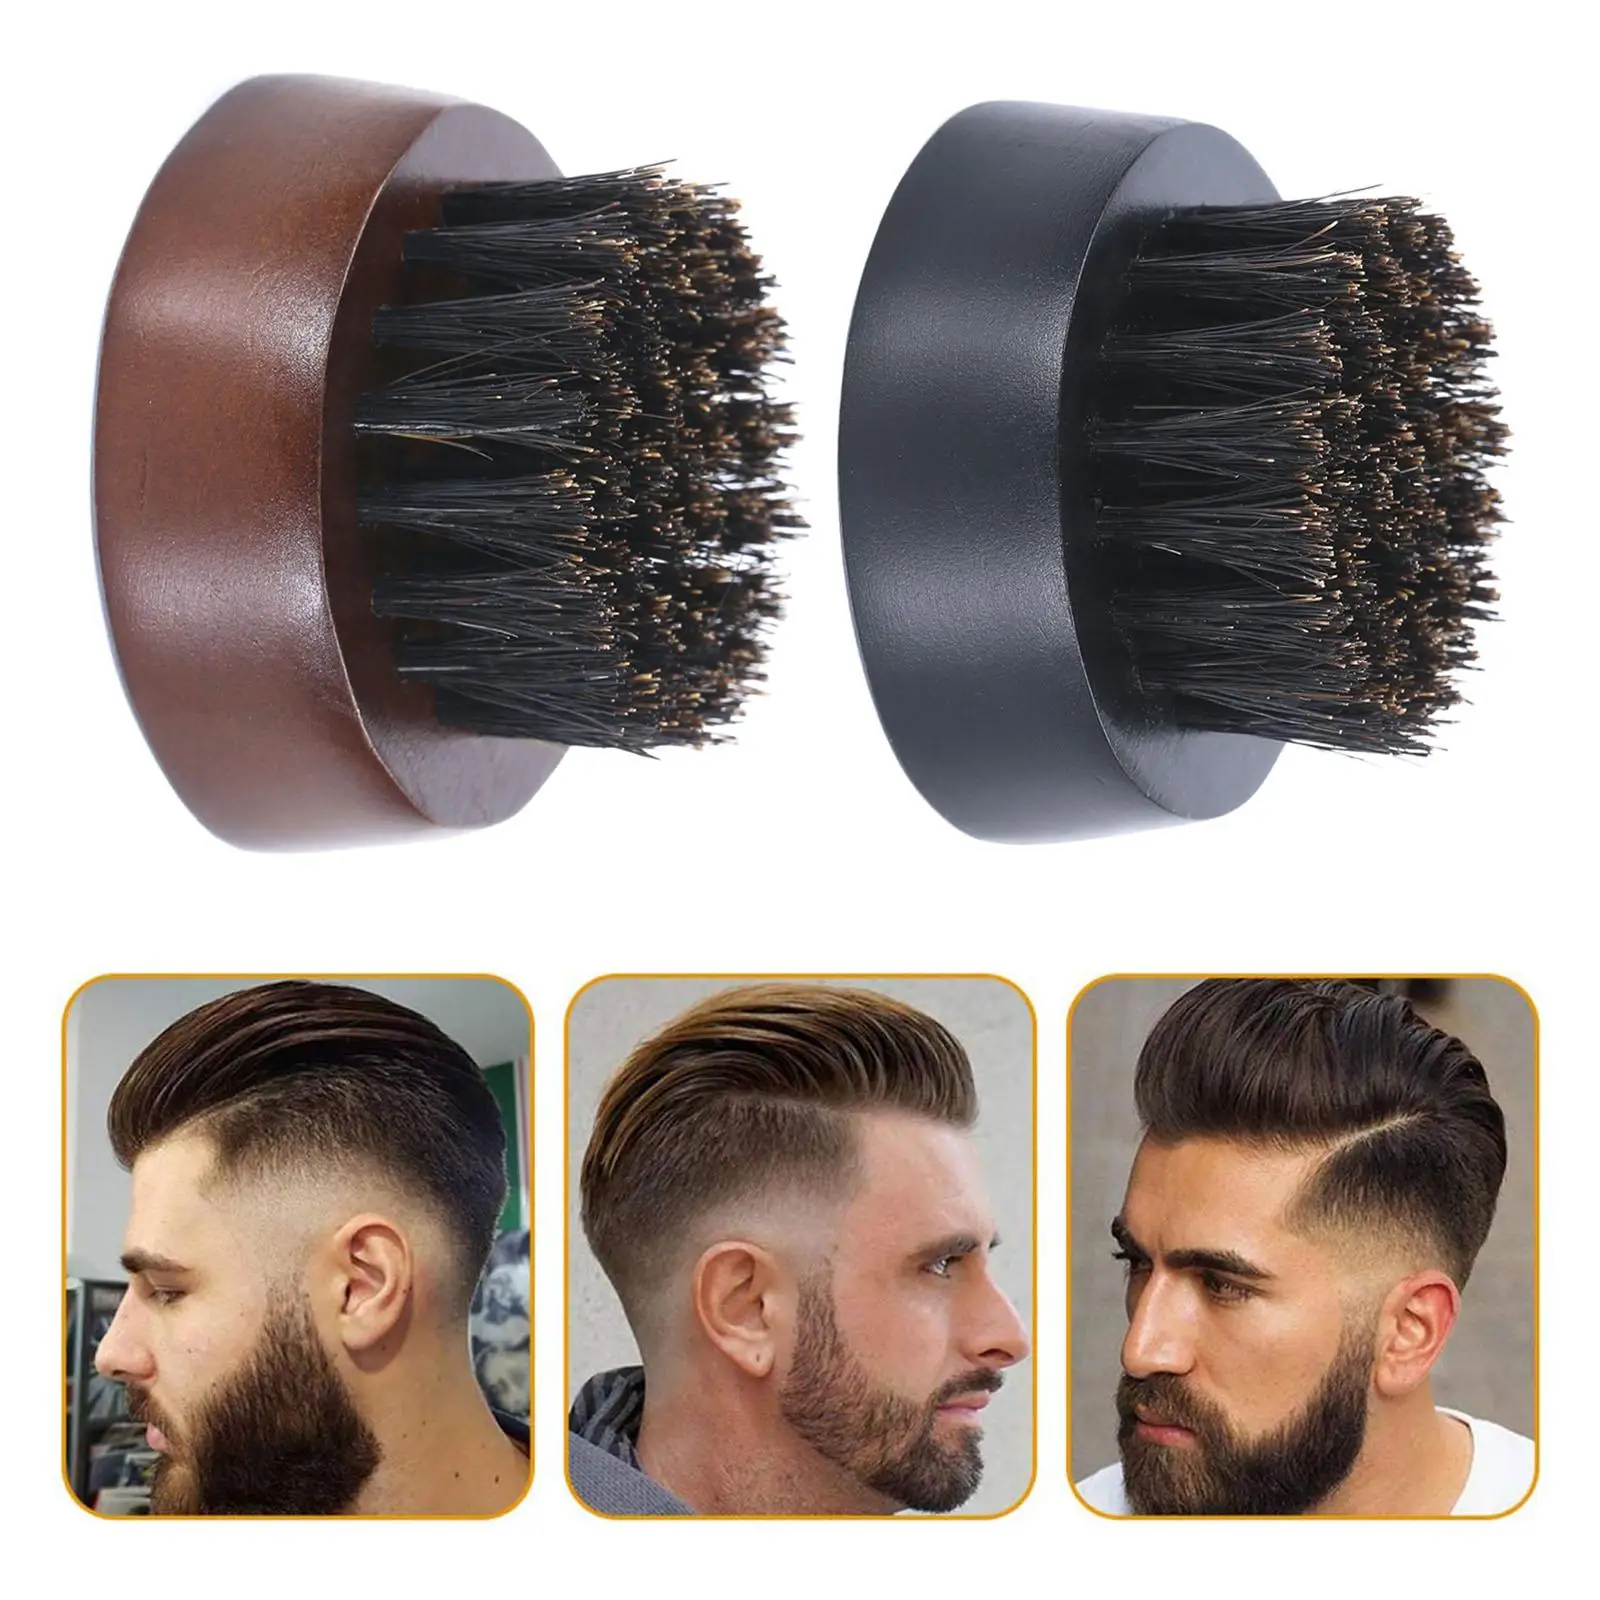 Wooden Beard Brush with Wooden Handle Boar Bristles Grooming for Conditioning Men